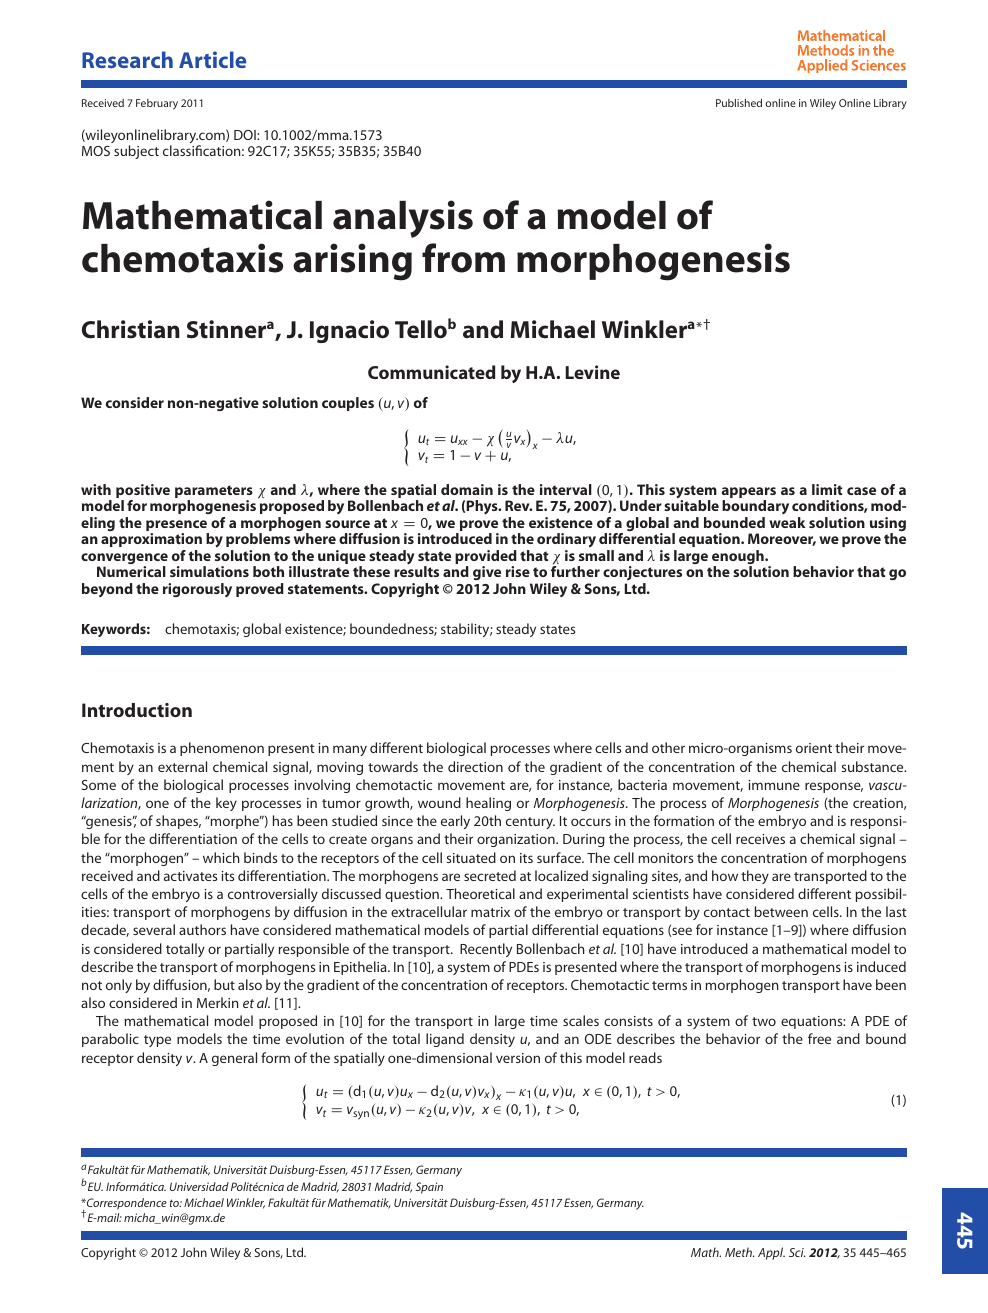 Mathematical Analysis Of A Model Of Chemotaxis Arising From Morphogenesis Topic Of Research Paper In Mathematics Download Scholarly Article Pdf And Read For Free On Cyberleninka Open Science Hub